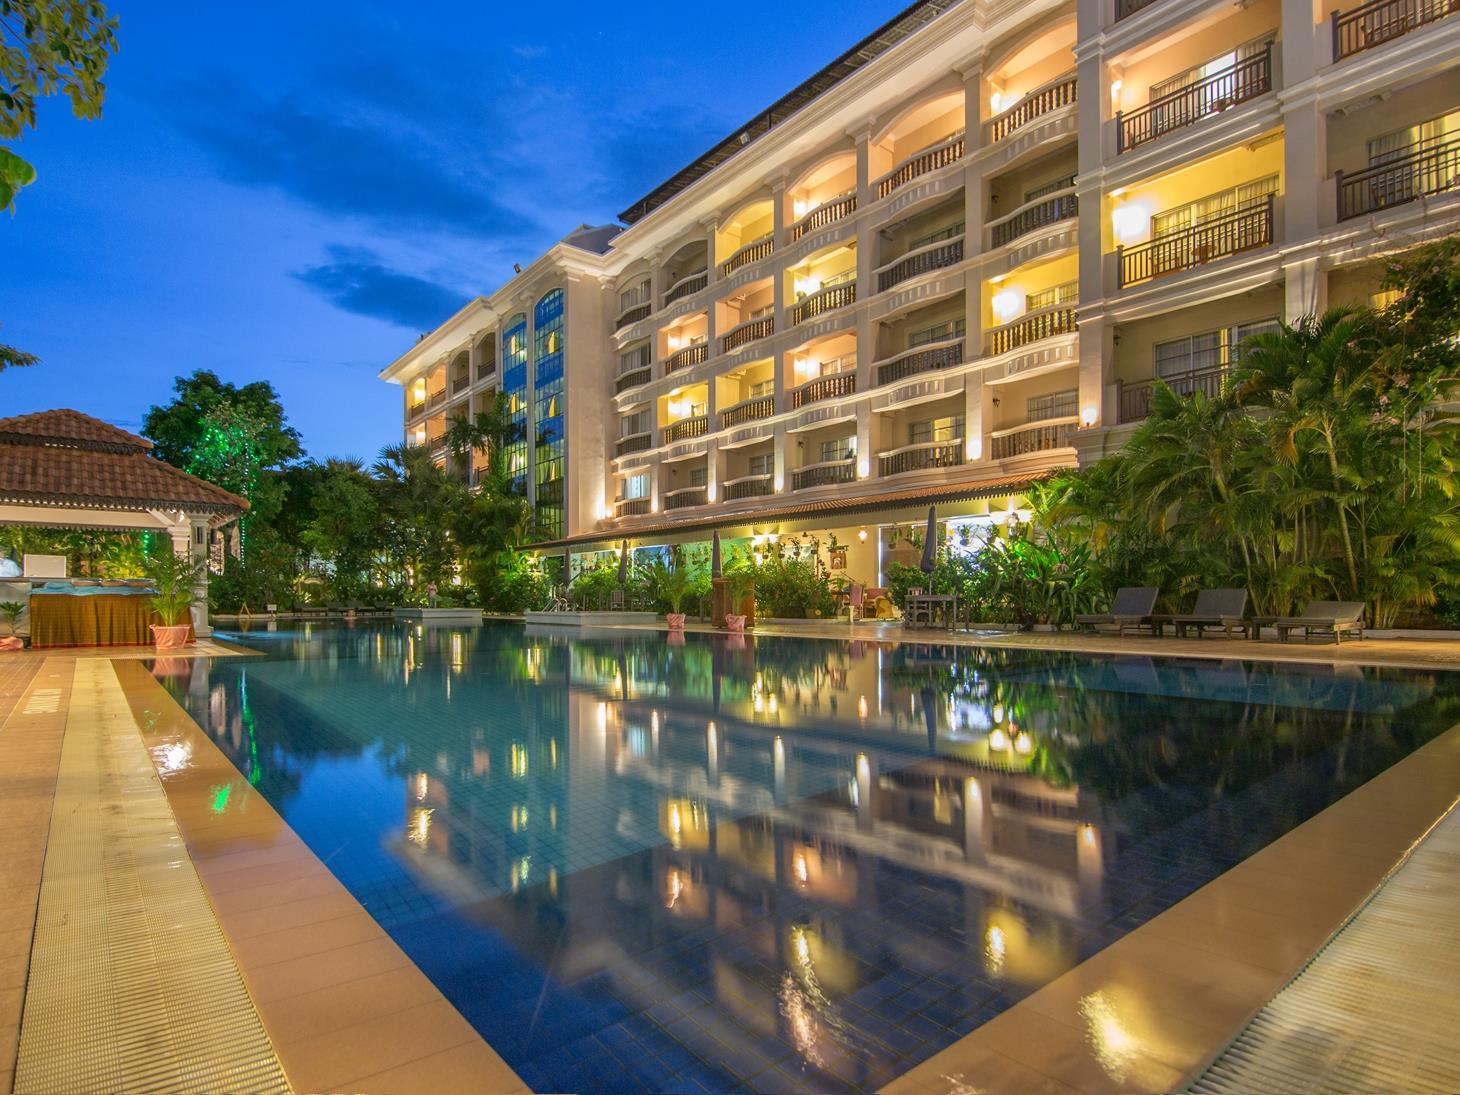 Hotel Somadevi Angkor Resort & Spa Siem Reap Province FAQ 2017, What facilities are there in Hotel Somadevi Angkor Resort & Spa Siem Reap Province 2017, What Languages Spoken are Supported in Hotel Somadevi Angkor Resort & Spa Siem Reap Province 2017, Which payment cards are accepted in Hotel Somadevi Angkor Resort & Spa Siem Reap Province , Siem Reap Province Hotel Somadevi Angkor Resort & Spa room facilities and services Q&A 2017, Siem Reap Province Hotel Somadevi Angkor Resort & Spa online booking services 2017, Siem Reap Province Hotel Somadevi Angkor Resort & Spa address 2017, Siem Reap Province Hotel Somadevi Angkor Resort & Spa telephone number 2017,Siem Reap Province Hotel Somadevi Angkor Resort & Spa map 2017, Siem Reap Province Hotel Somadevi Angkor Resort & Spa traffic guide 2017, how to go Siem Reap Province Hotel Somadevi Angkor Resort & Spa, Siem Reap Province Hotel Somadevi Angkor Resort & Spa booking online 2017, Siem Reap Province Hotel Somadevi Angkor Resort & Spa room types 2017.